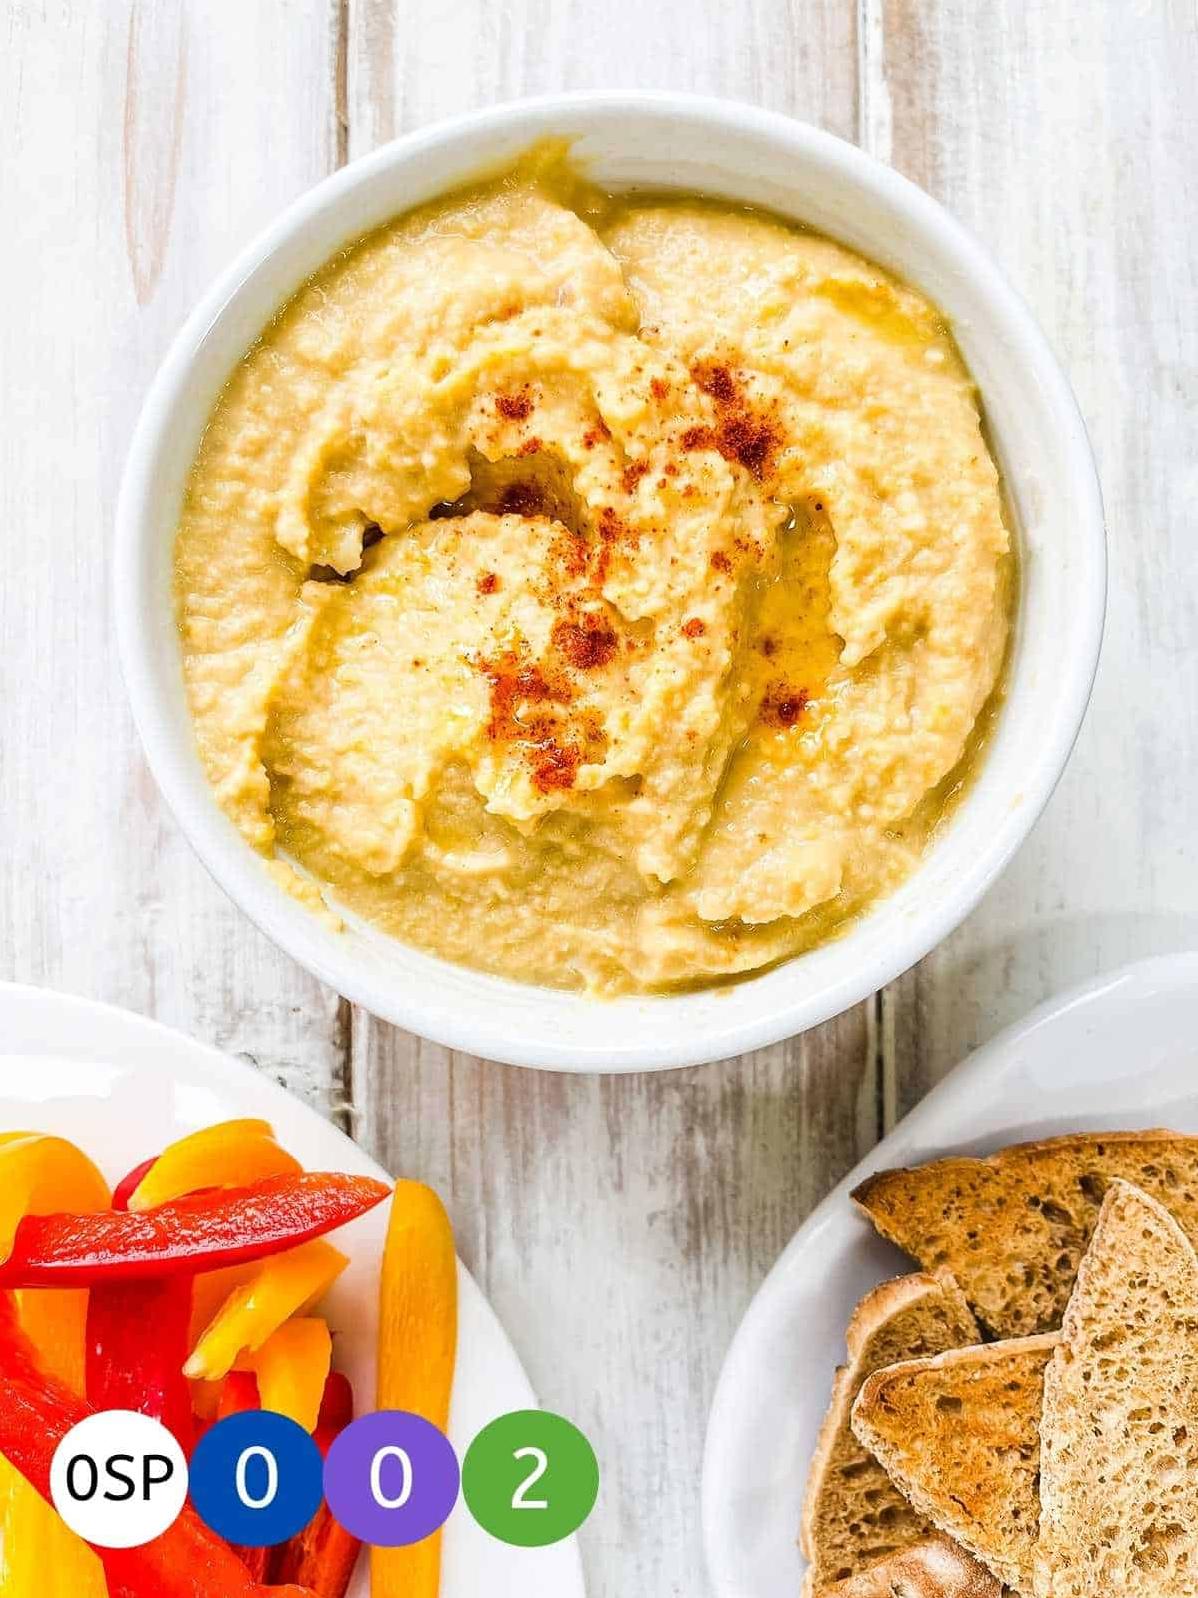  Spread some love on your pita with this heart-healthy hummus